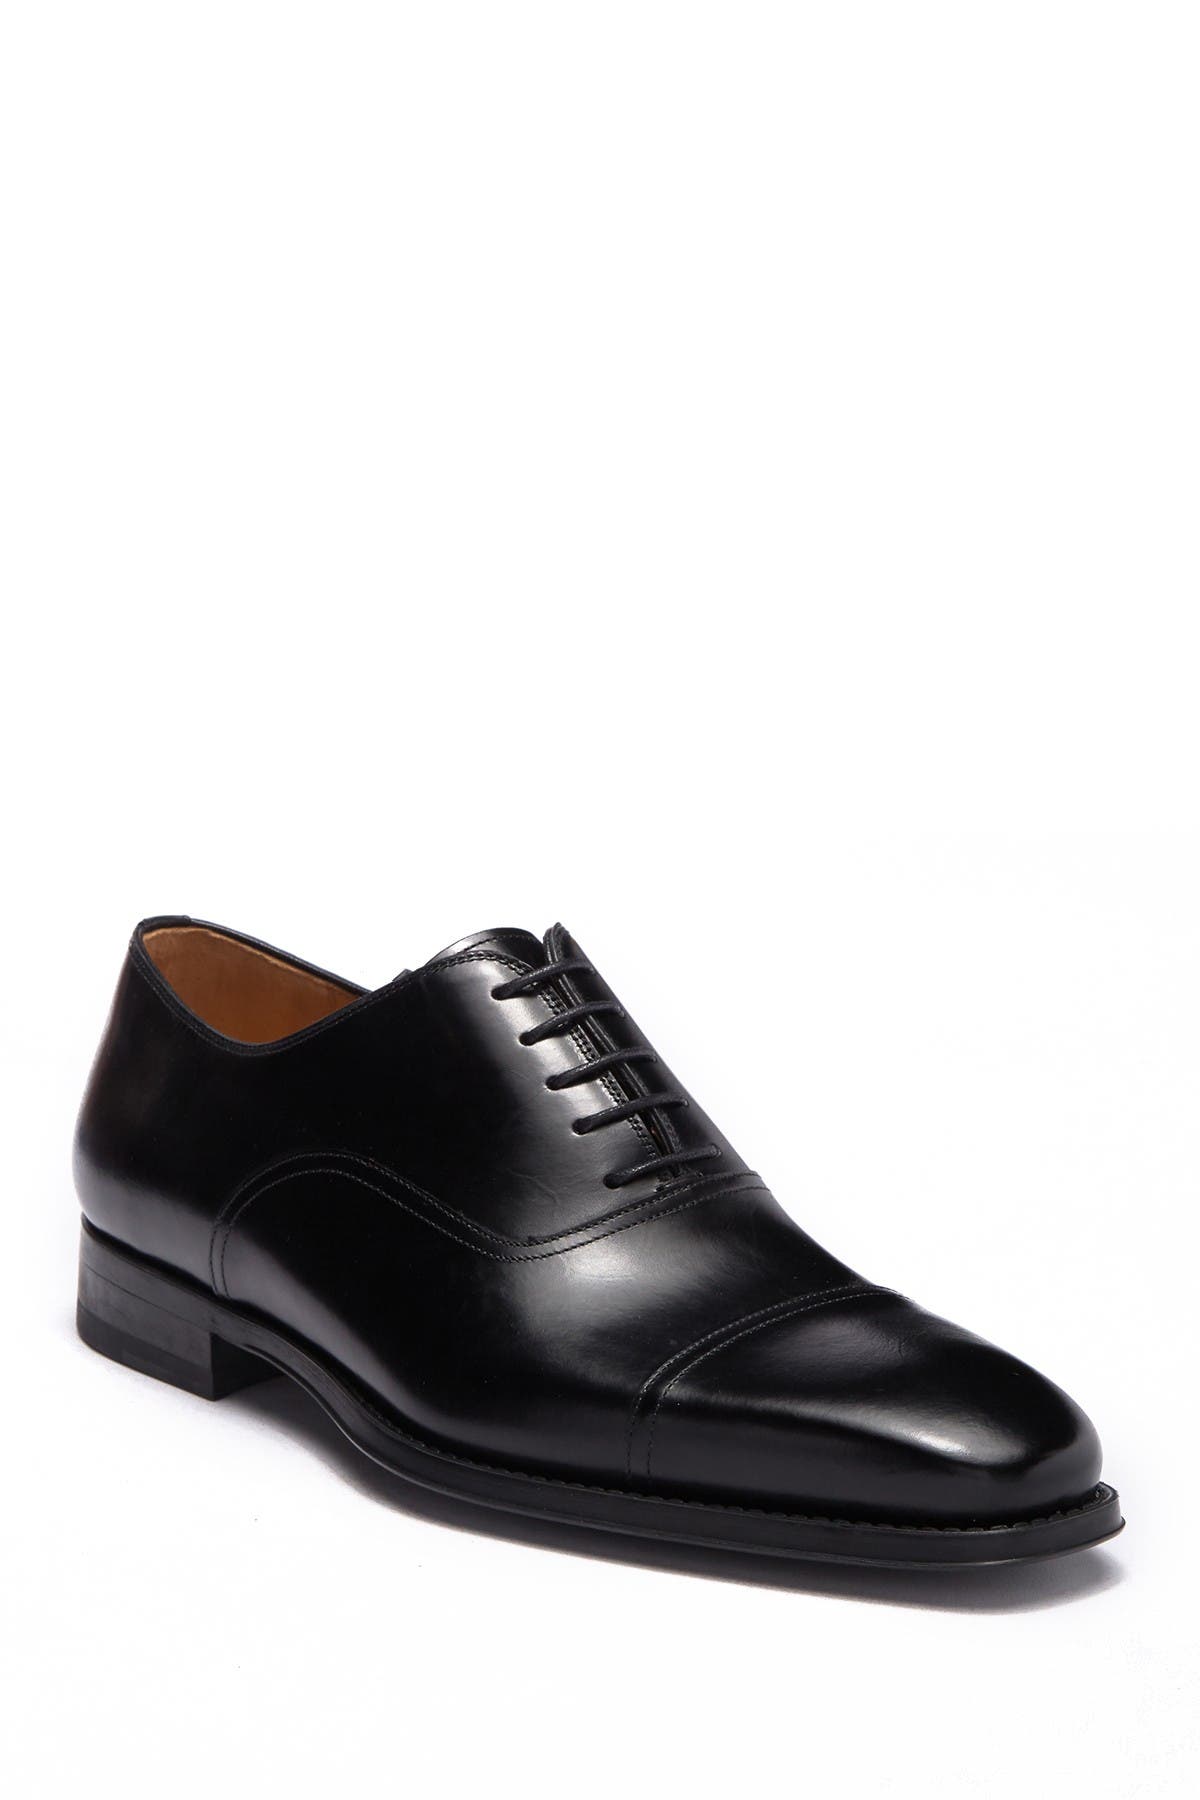 Magnanni | Lucas Leather Oxford - Wide 